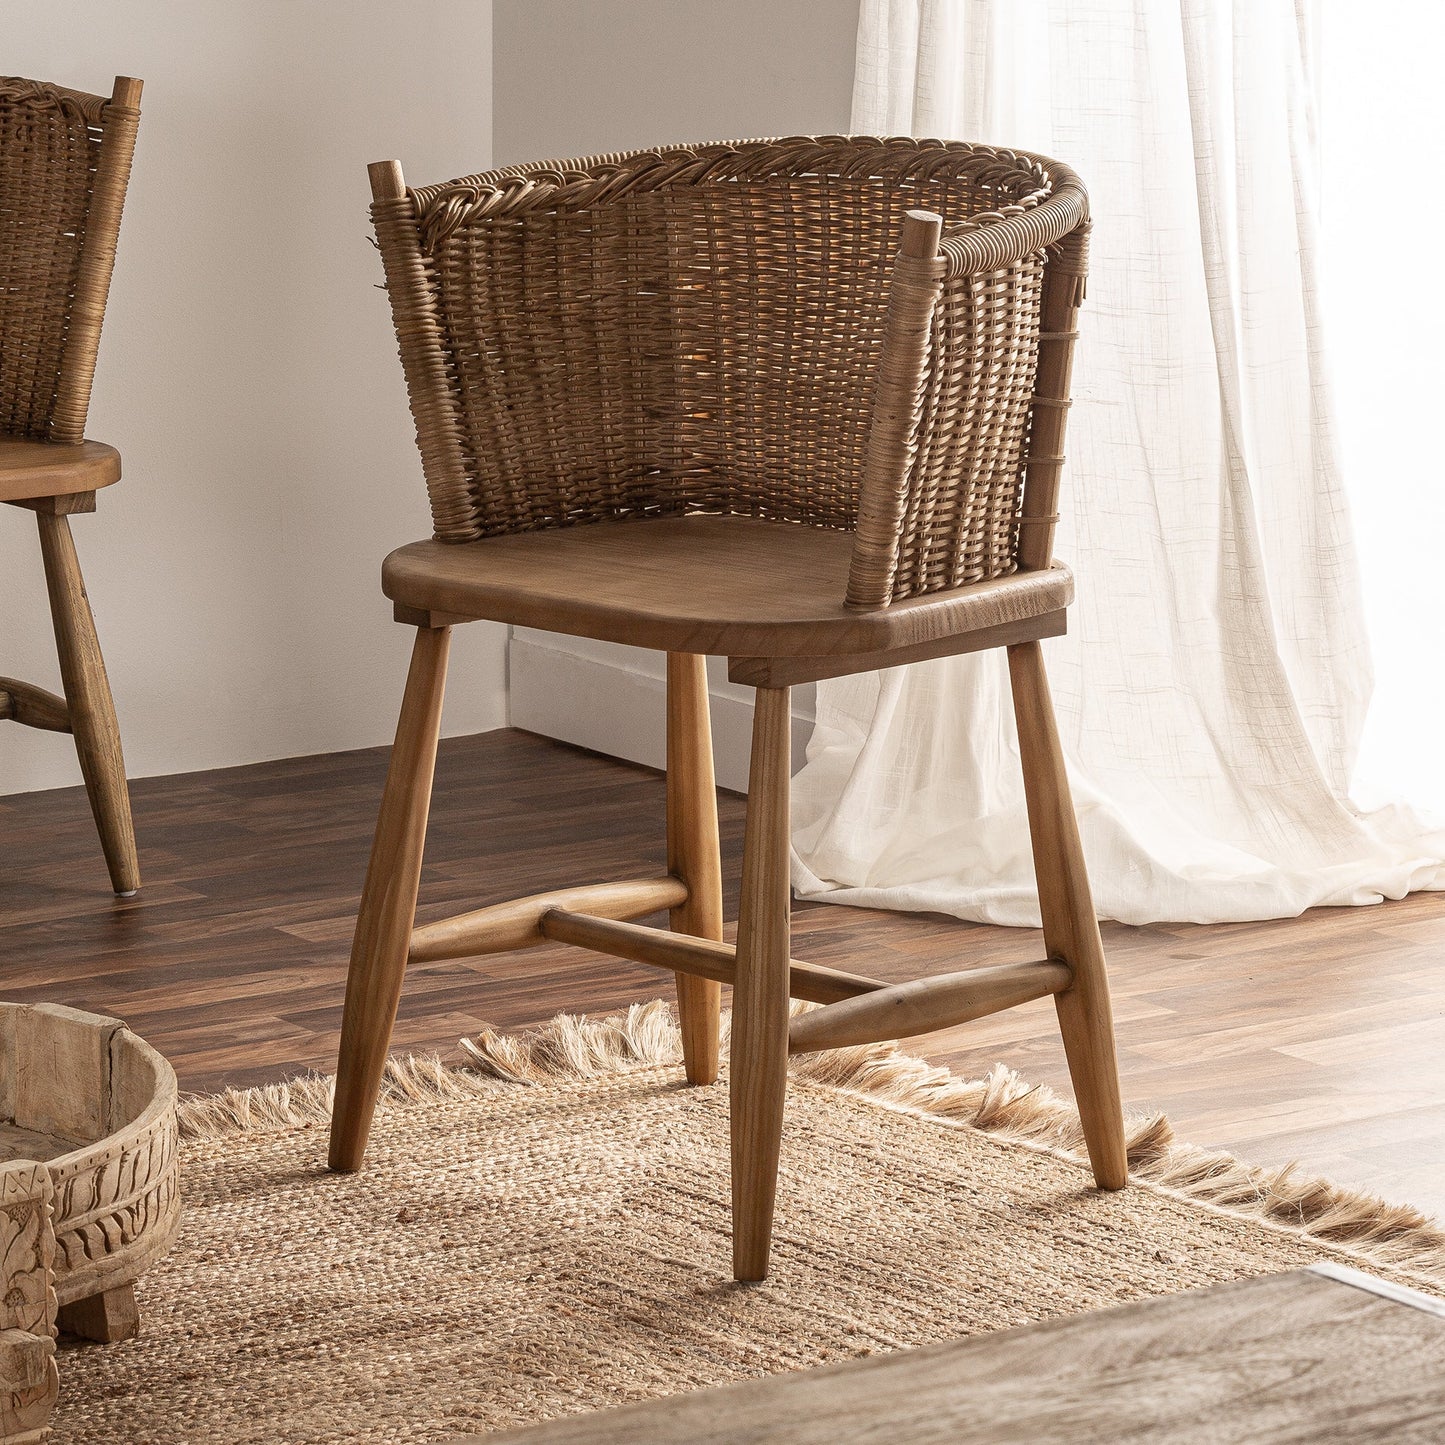 Quenza Stool in Natural Colour